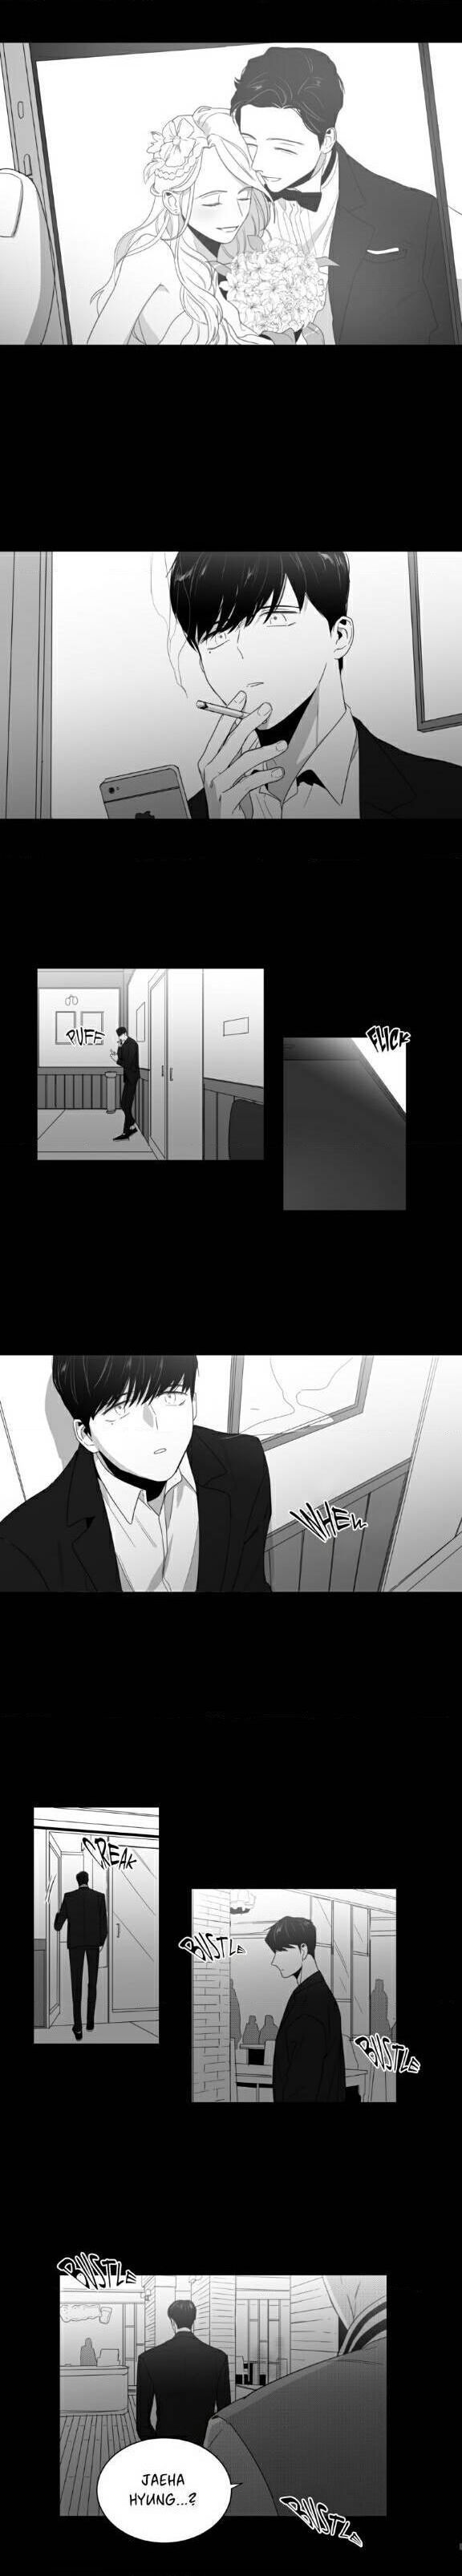 Lover Boy (Lezhin) Chapter 048.5 page 18